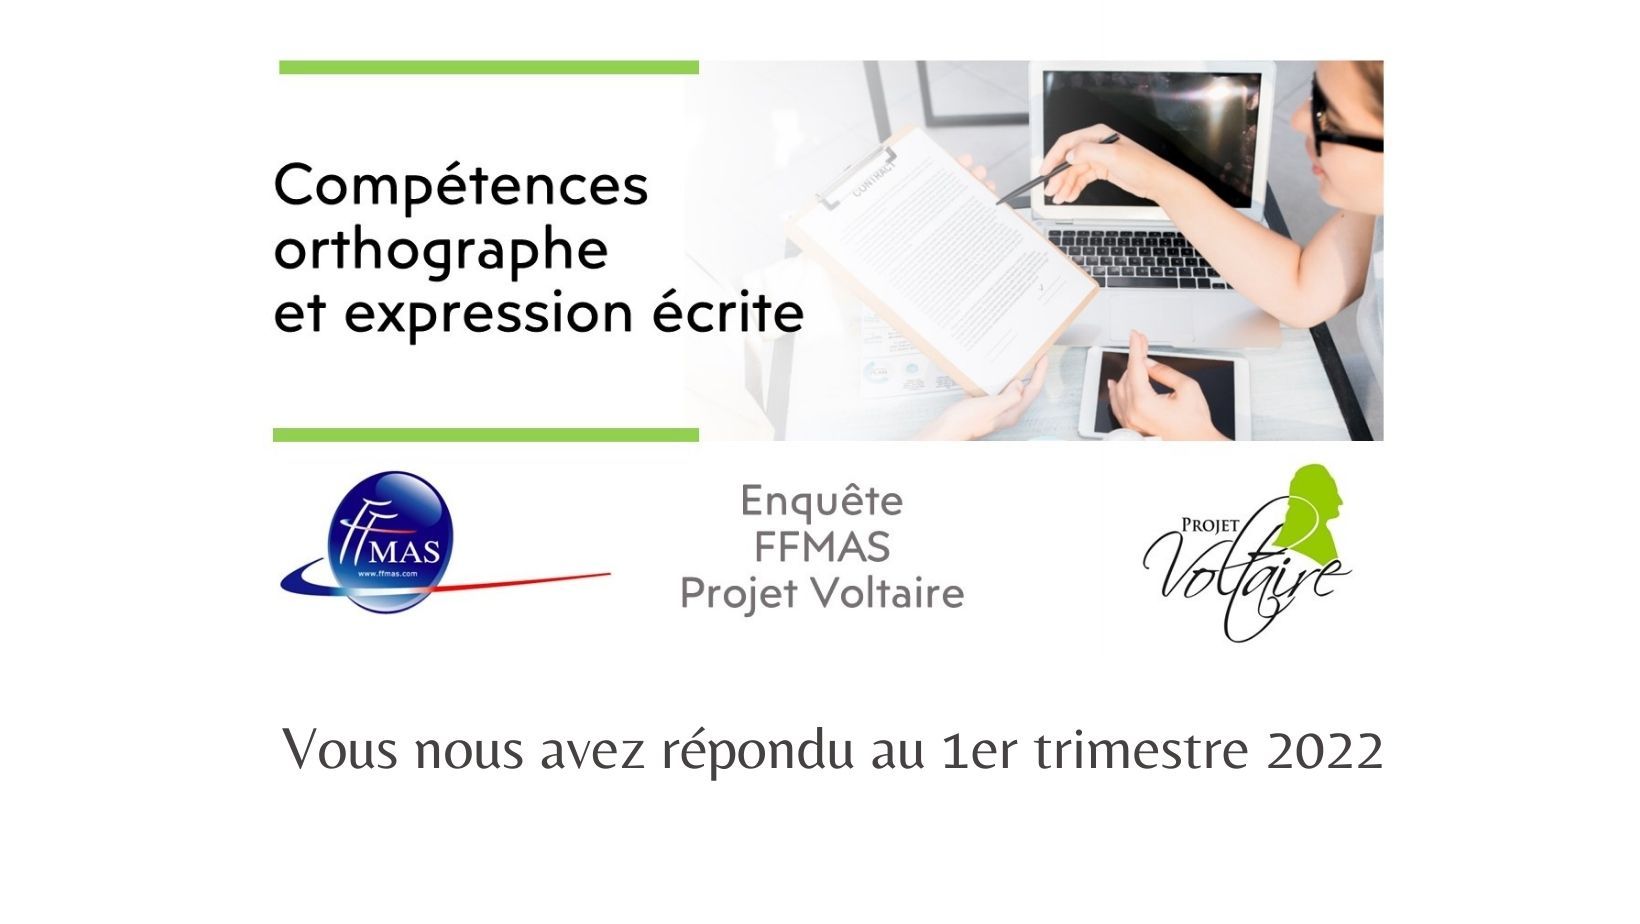 You are currently viewing Orthographe & expression écrite | Vos confidences du 1er trimestre 2022